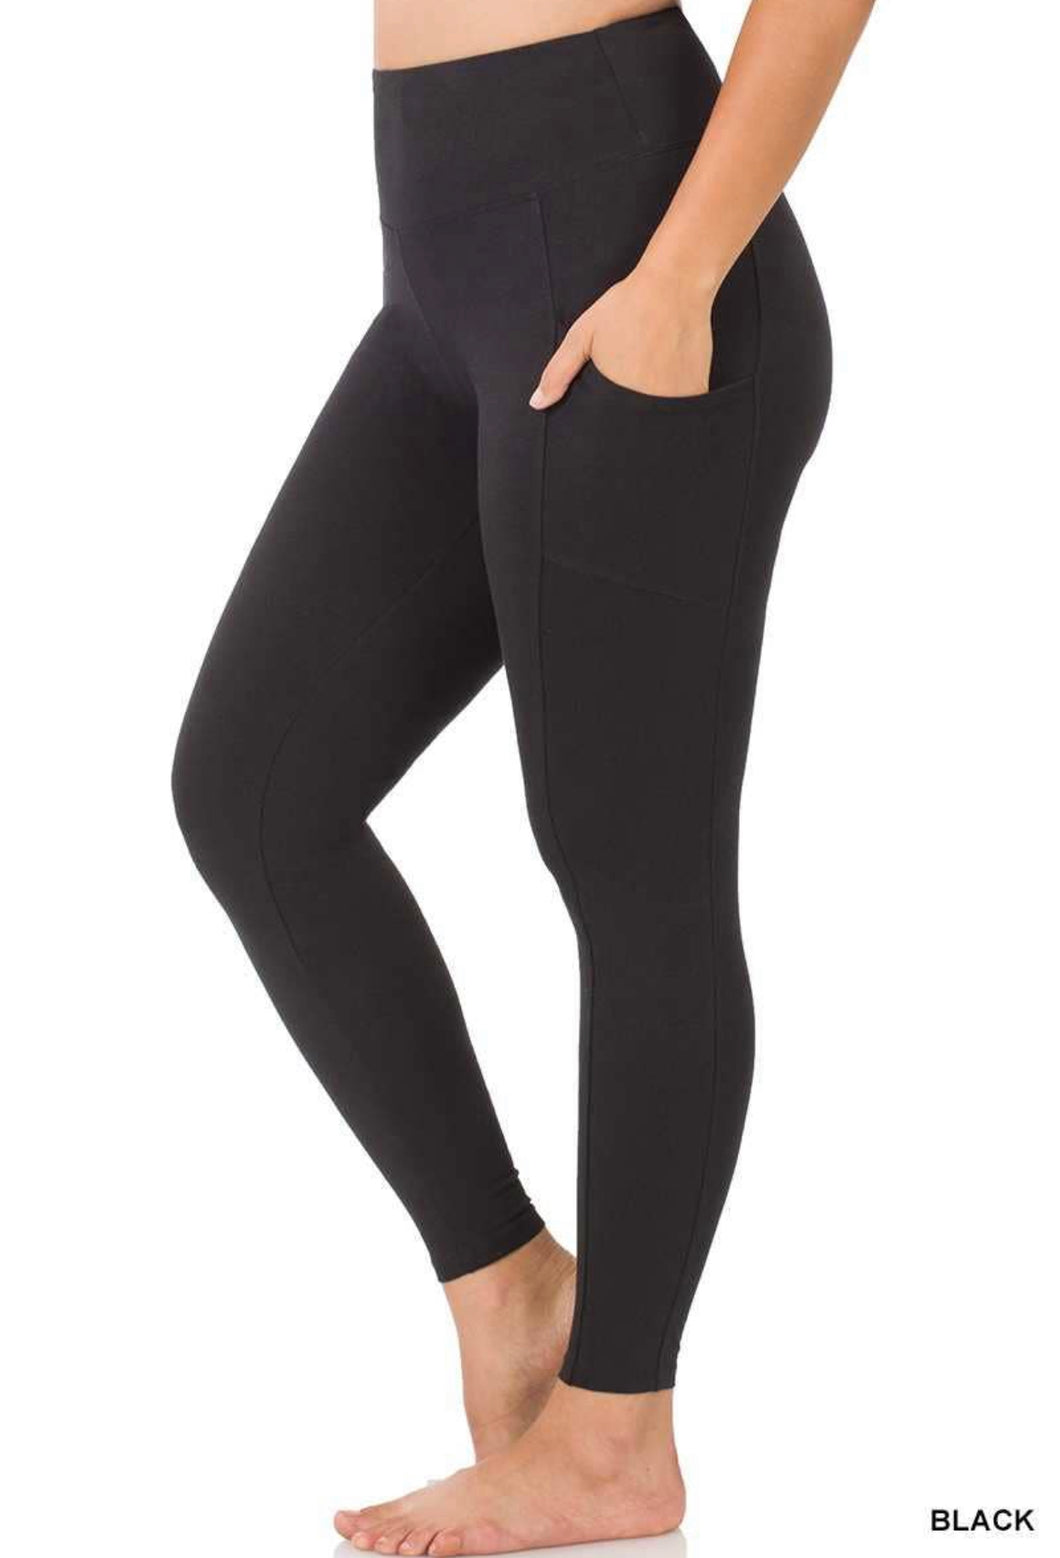 Wide Waste-band Leggings with pockets